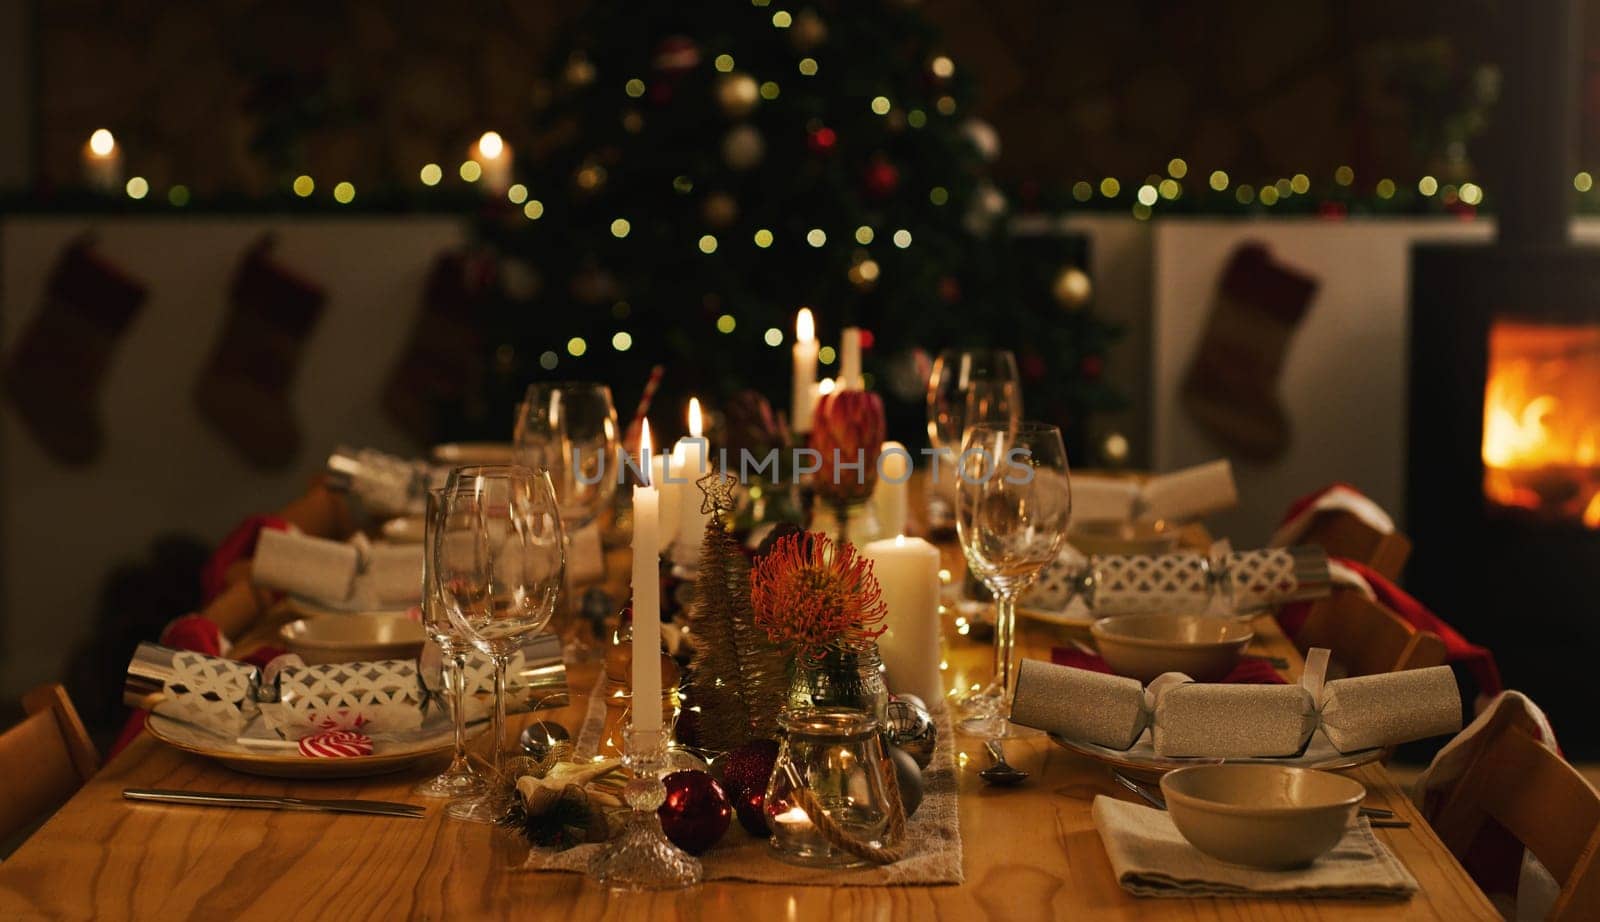 Dinner, table and Christmas in home with candles at night, love and celebration for holidays. Feast, dining and house or dark with lights for xmas, flowers and bowls or wine glasses at fireplace by YuriArcurs